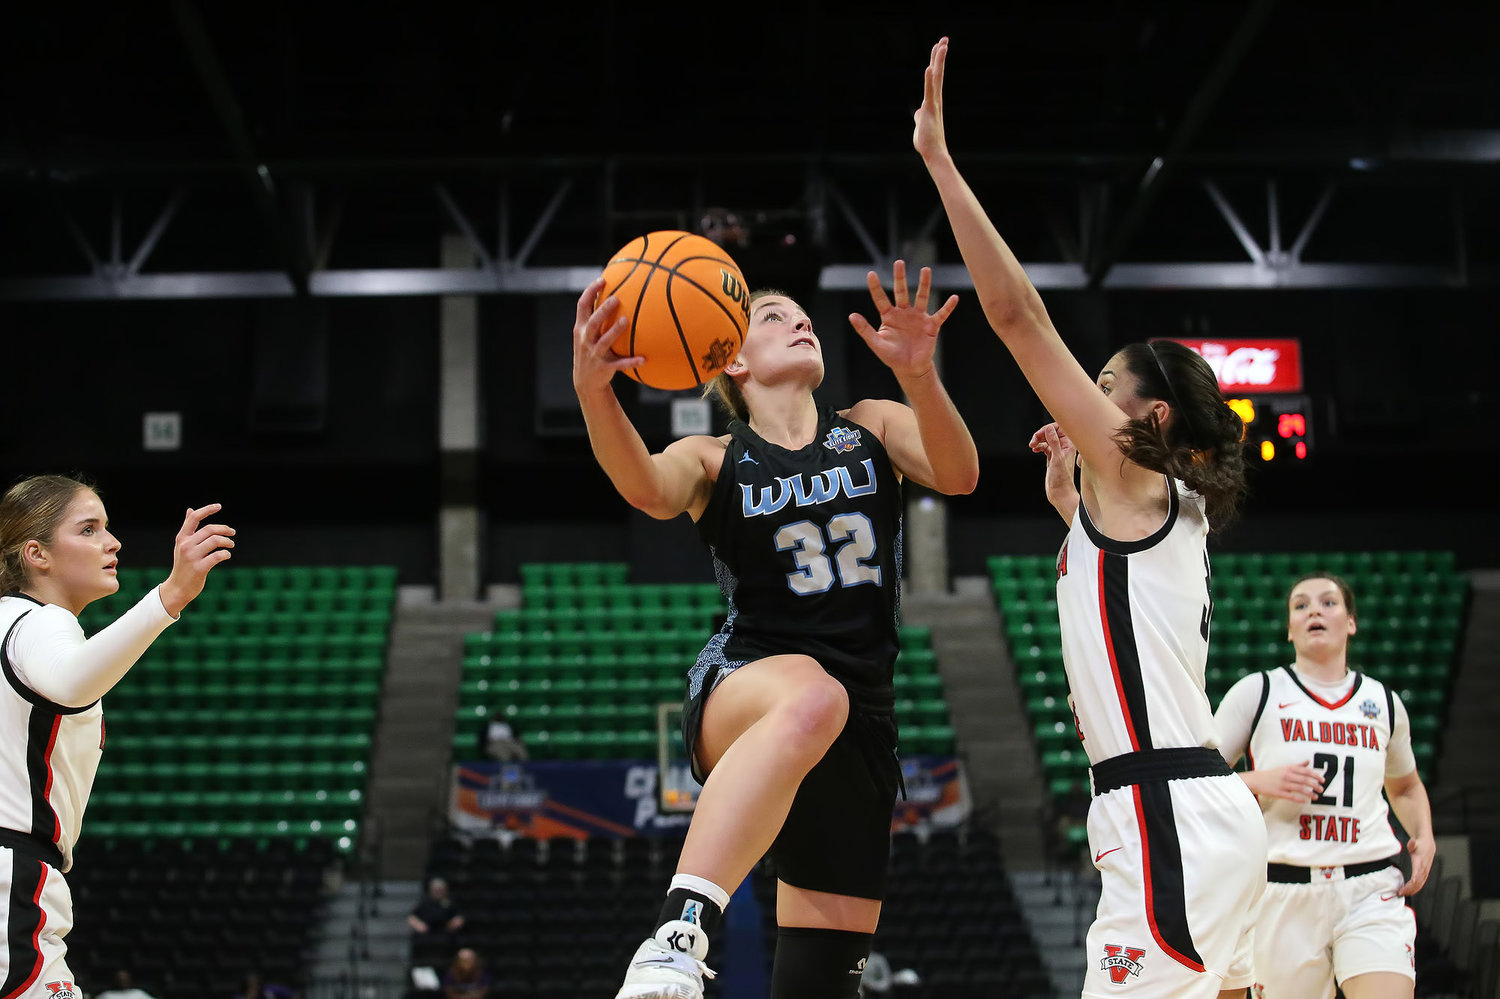 Napavine alum Mollie Olson (32) drives to the hoop for Western Washington University during the Vikings' win over Valdosta State in the NCAA Division II Women's Elite Eight tournament in Birmingham, Alabama on March 21.